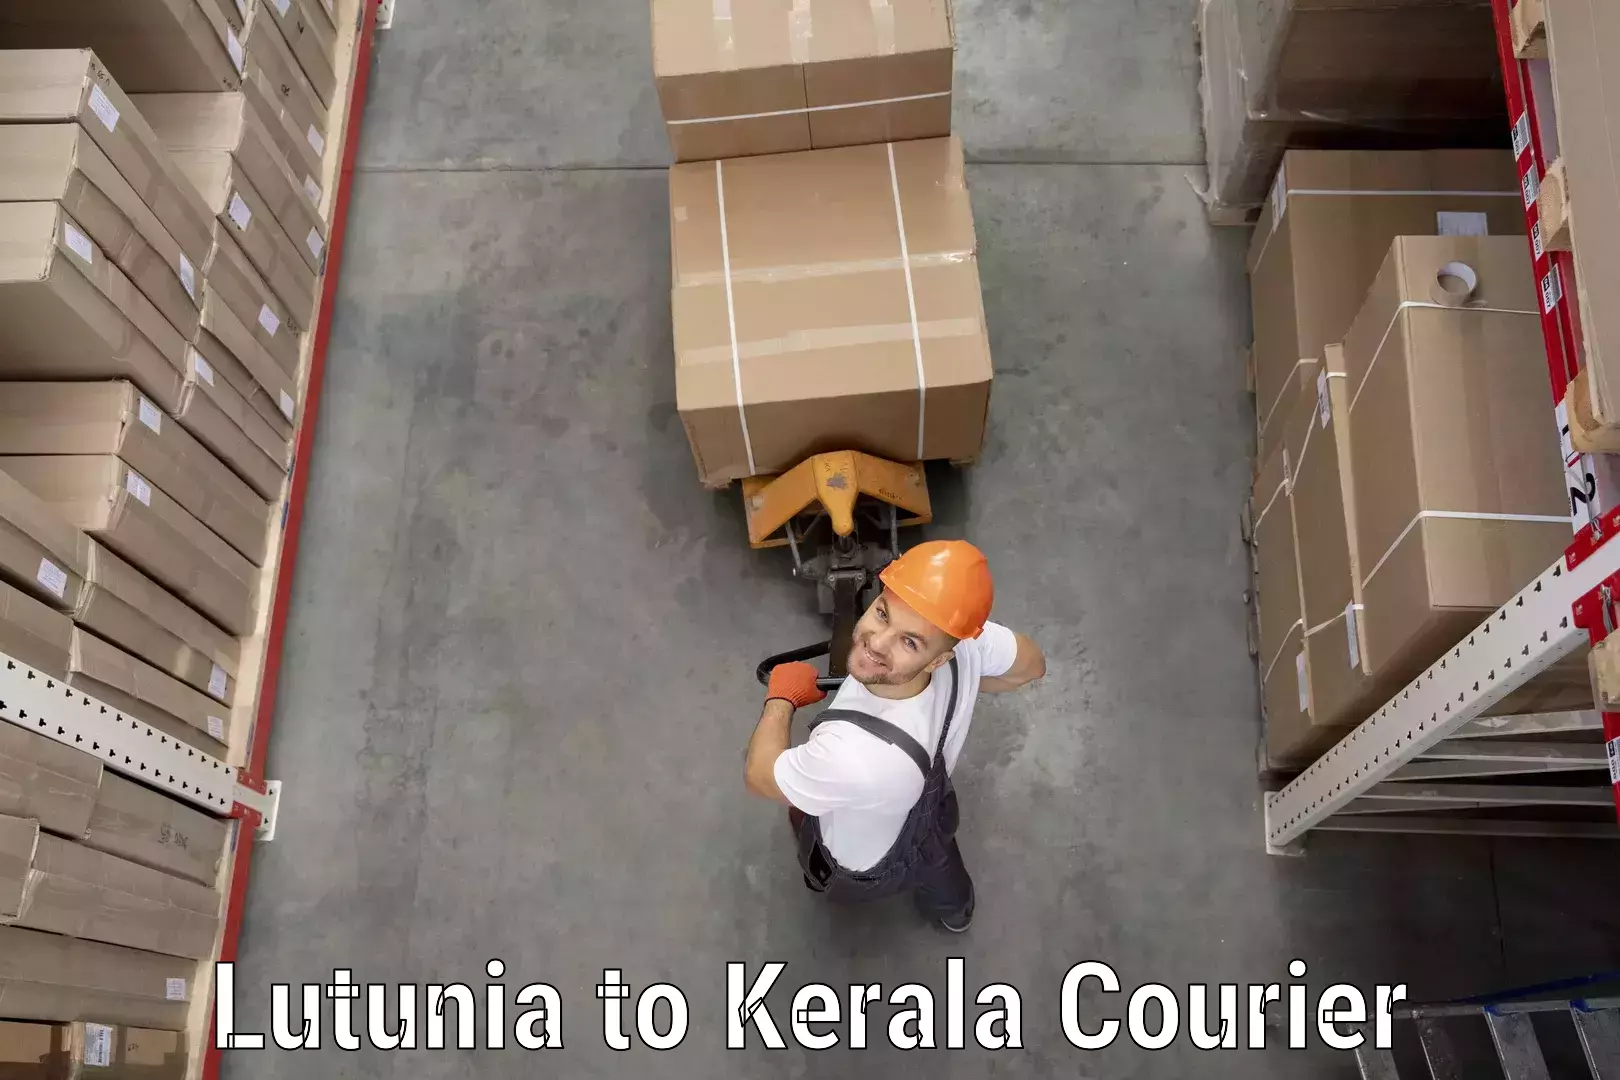 Advanced tracking systems Lutunia to Kerala